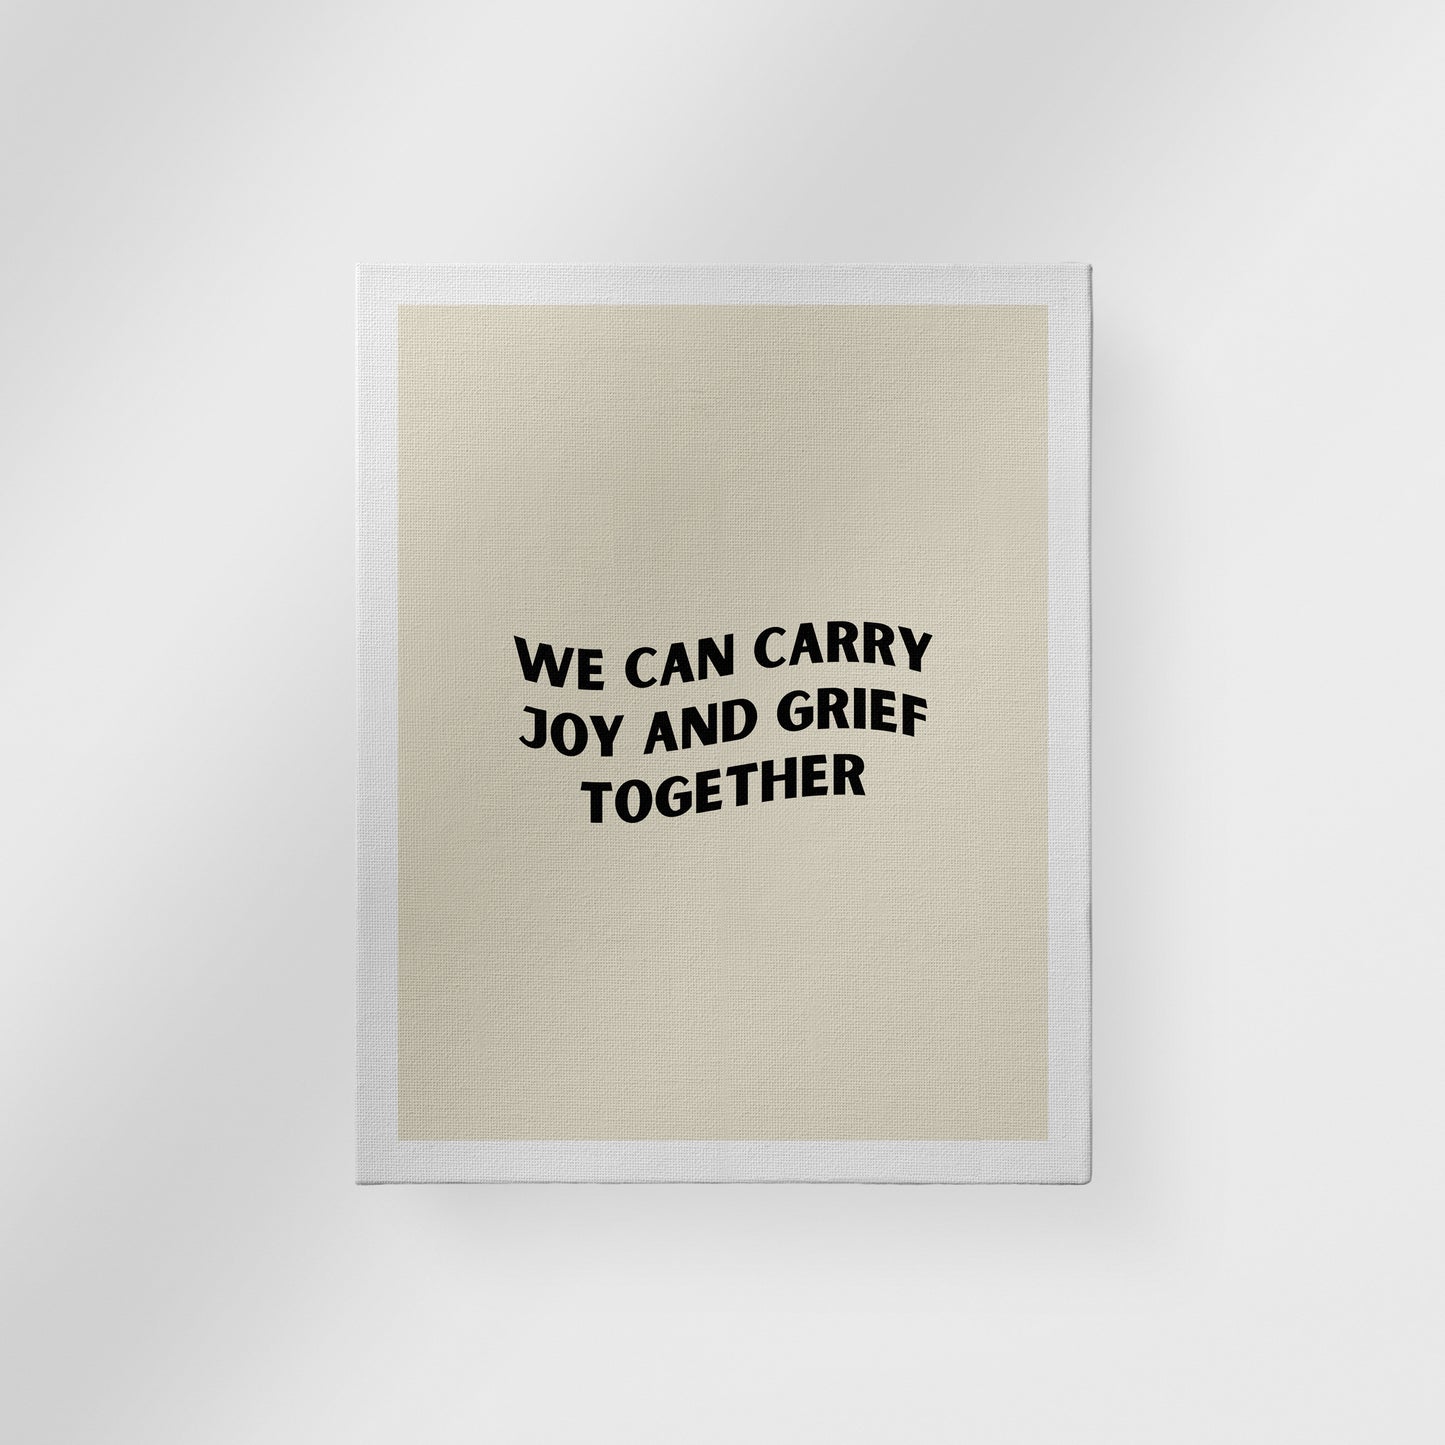 We Can Carry Joy and Grief Together Digital Print